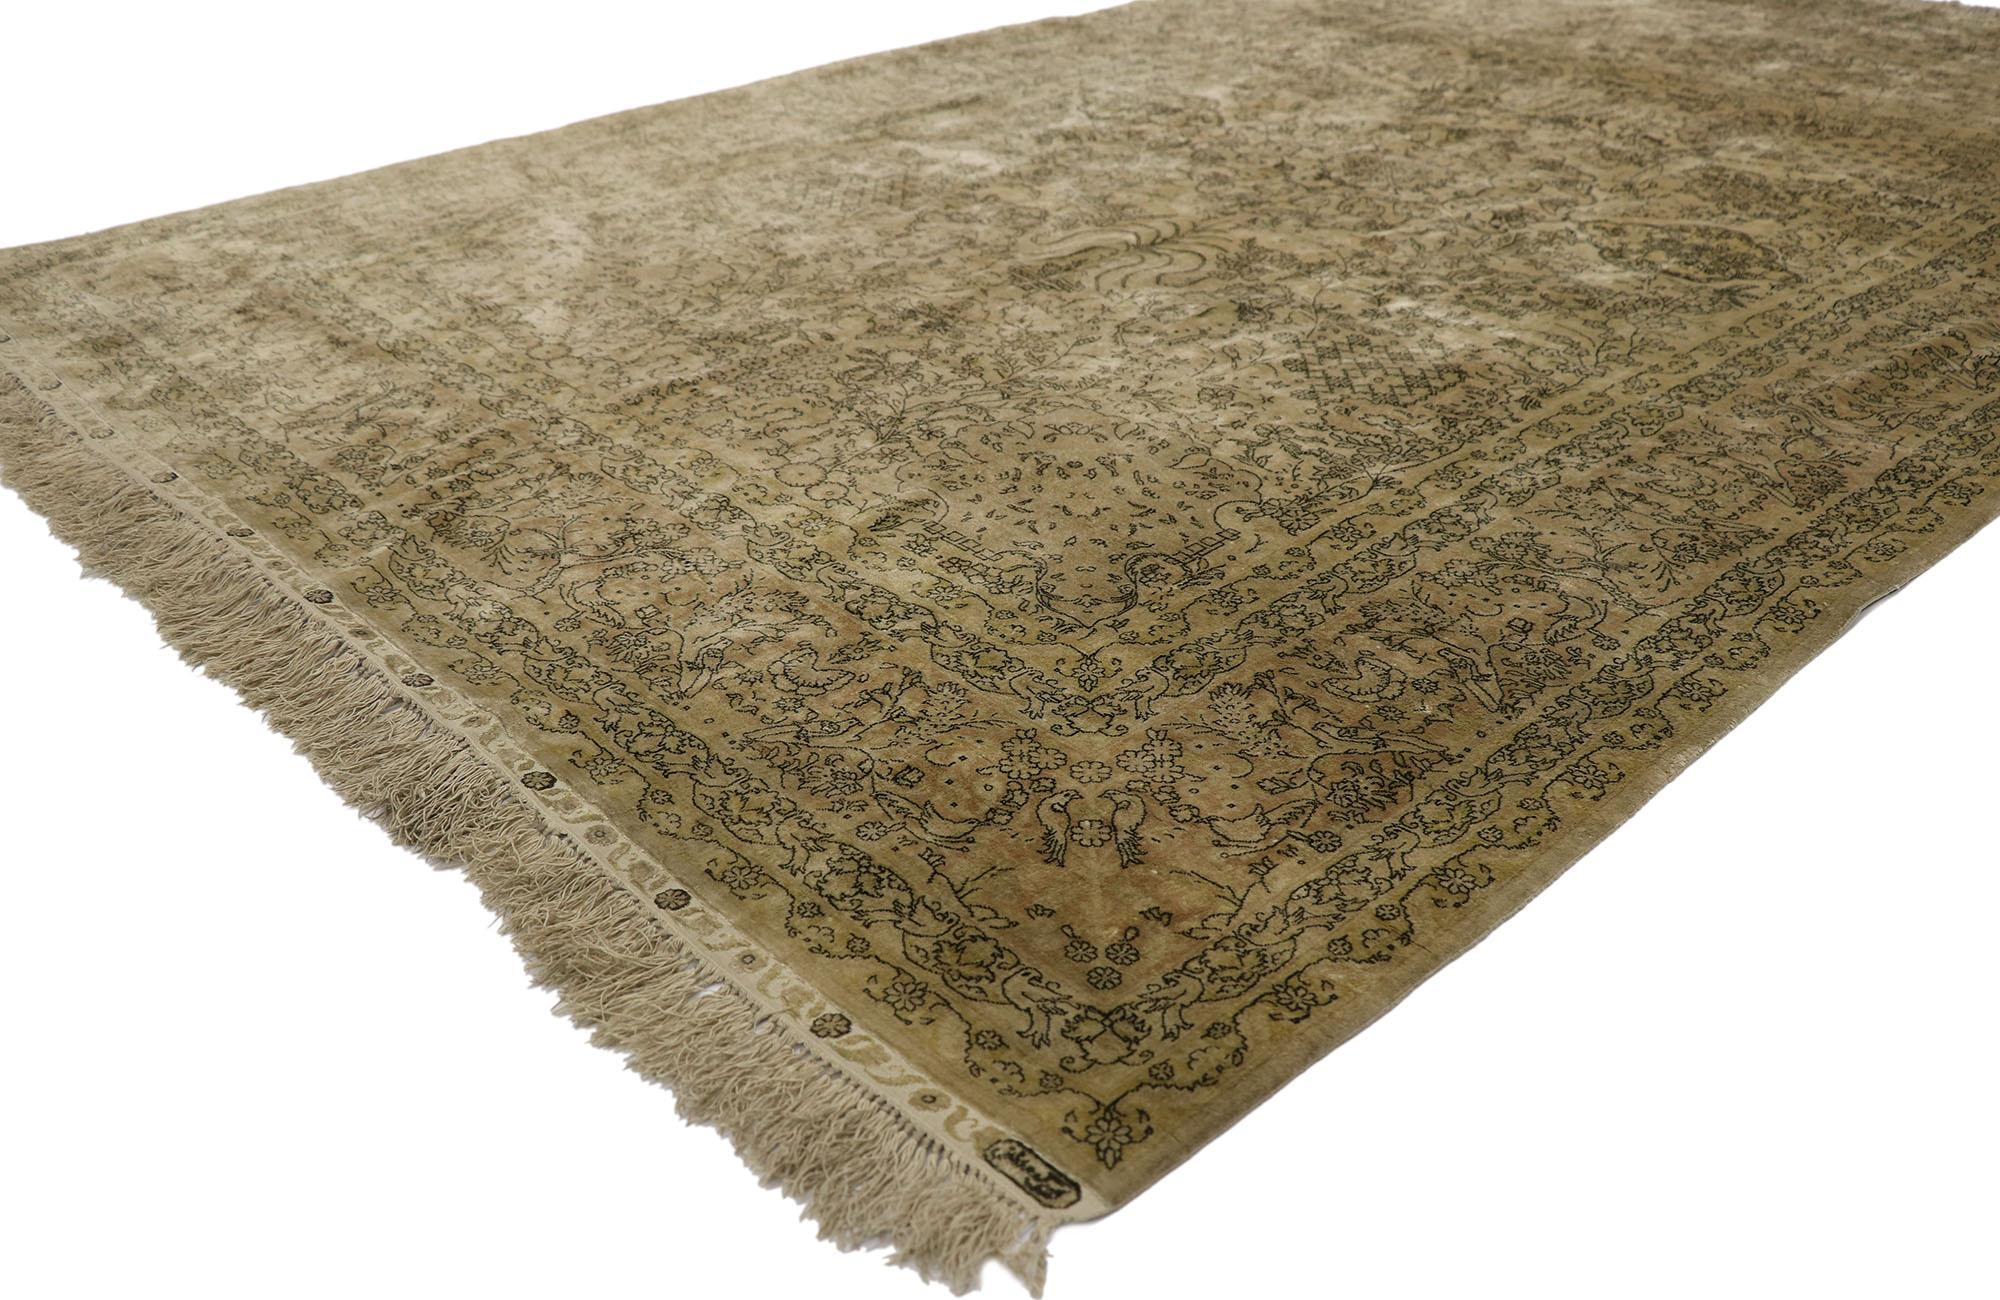 21685 vintage Turkish silk Hereke rug with Art Nouveau style 05'01 x 08'00. Warm and inviting with incredible detail and texture, this hand-knotted silk vintage Turkish Hereke rug charms with ease. Taking center stage is an open concentric round